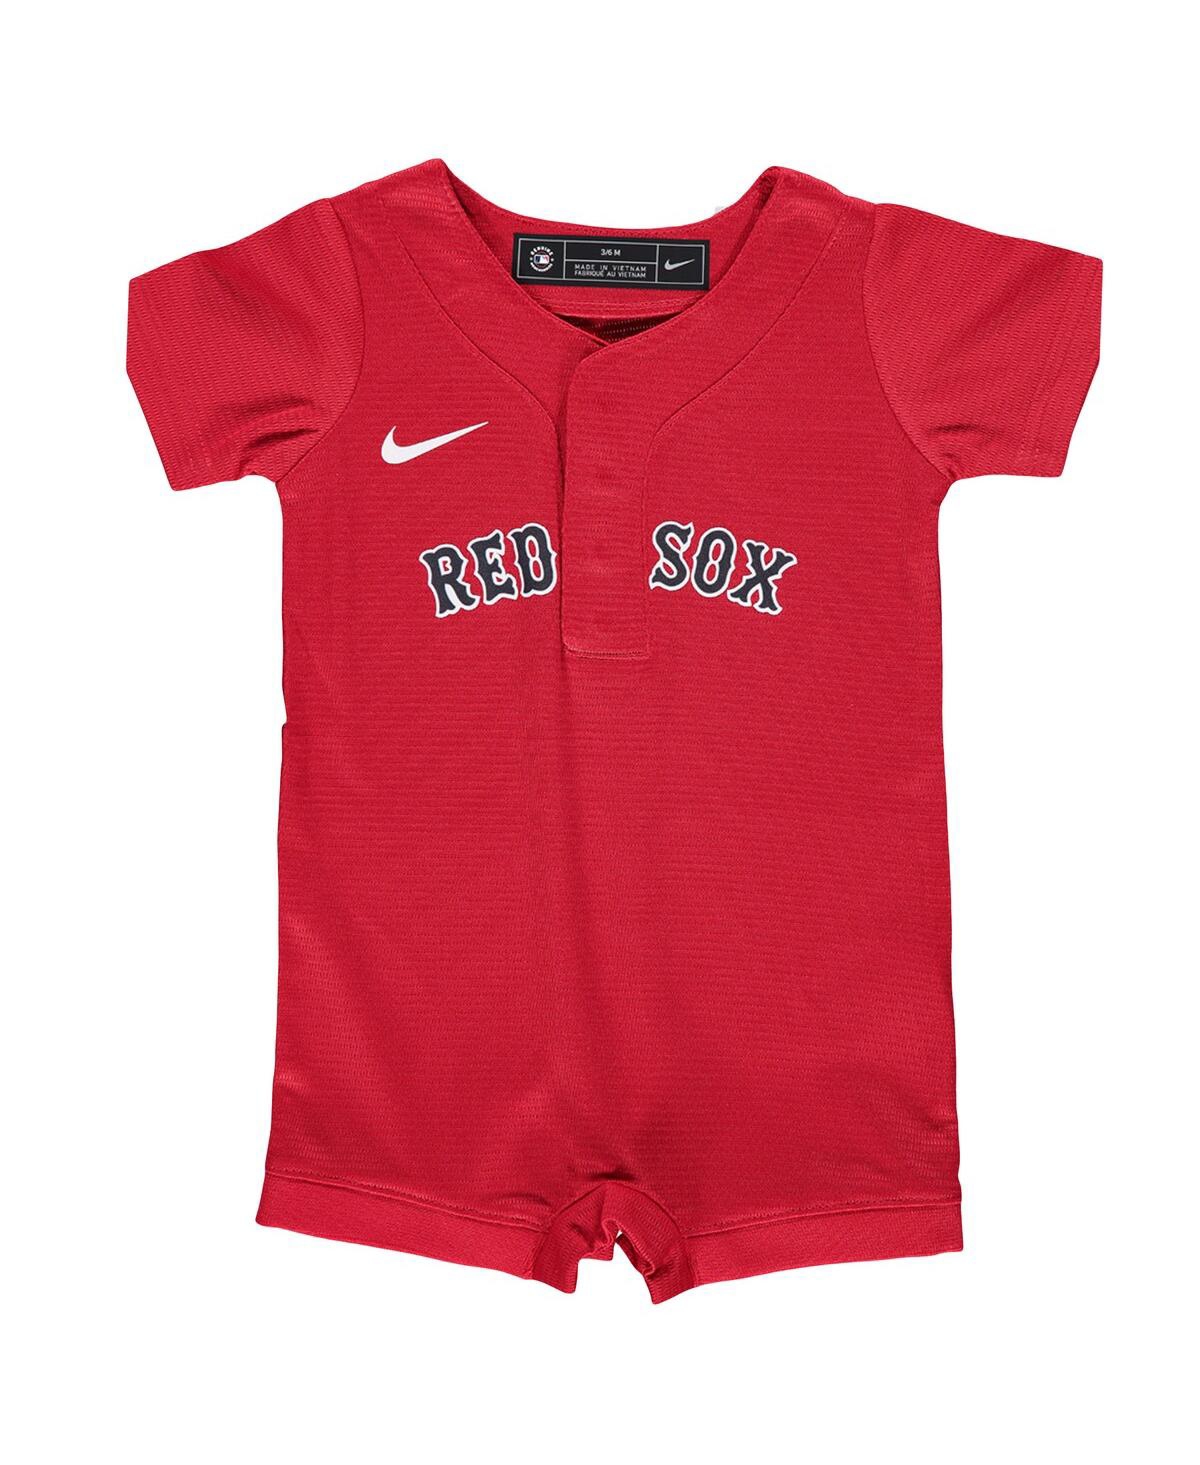 NIKE NEWBORN AND INFANT BOYS AND GIRLS NIKE RED BOSTON RED SOX OFFICIAL JERSEY ROMPER